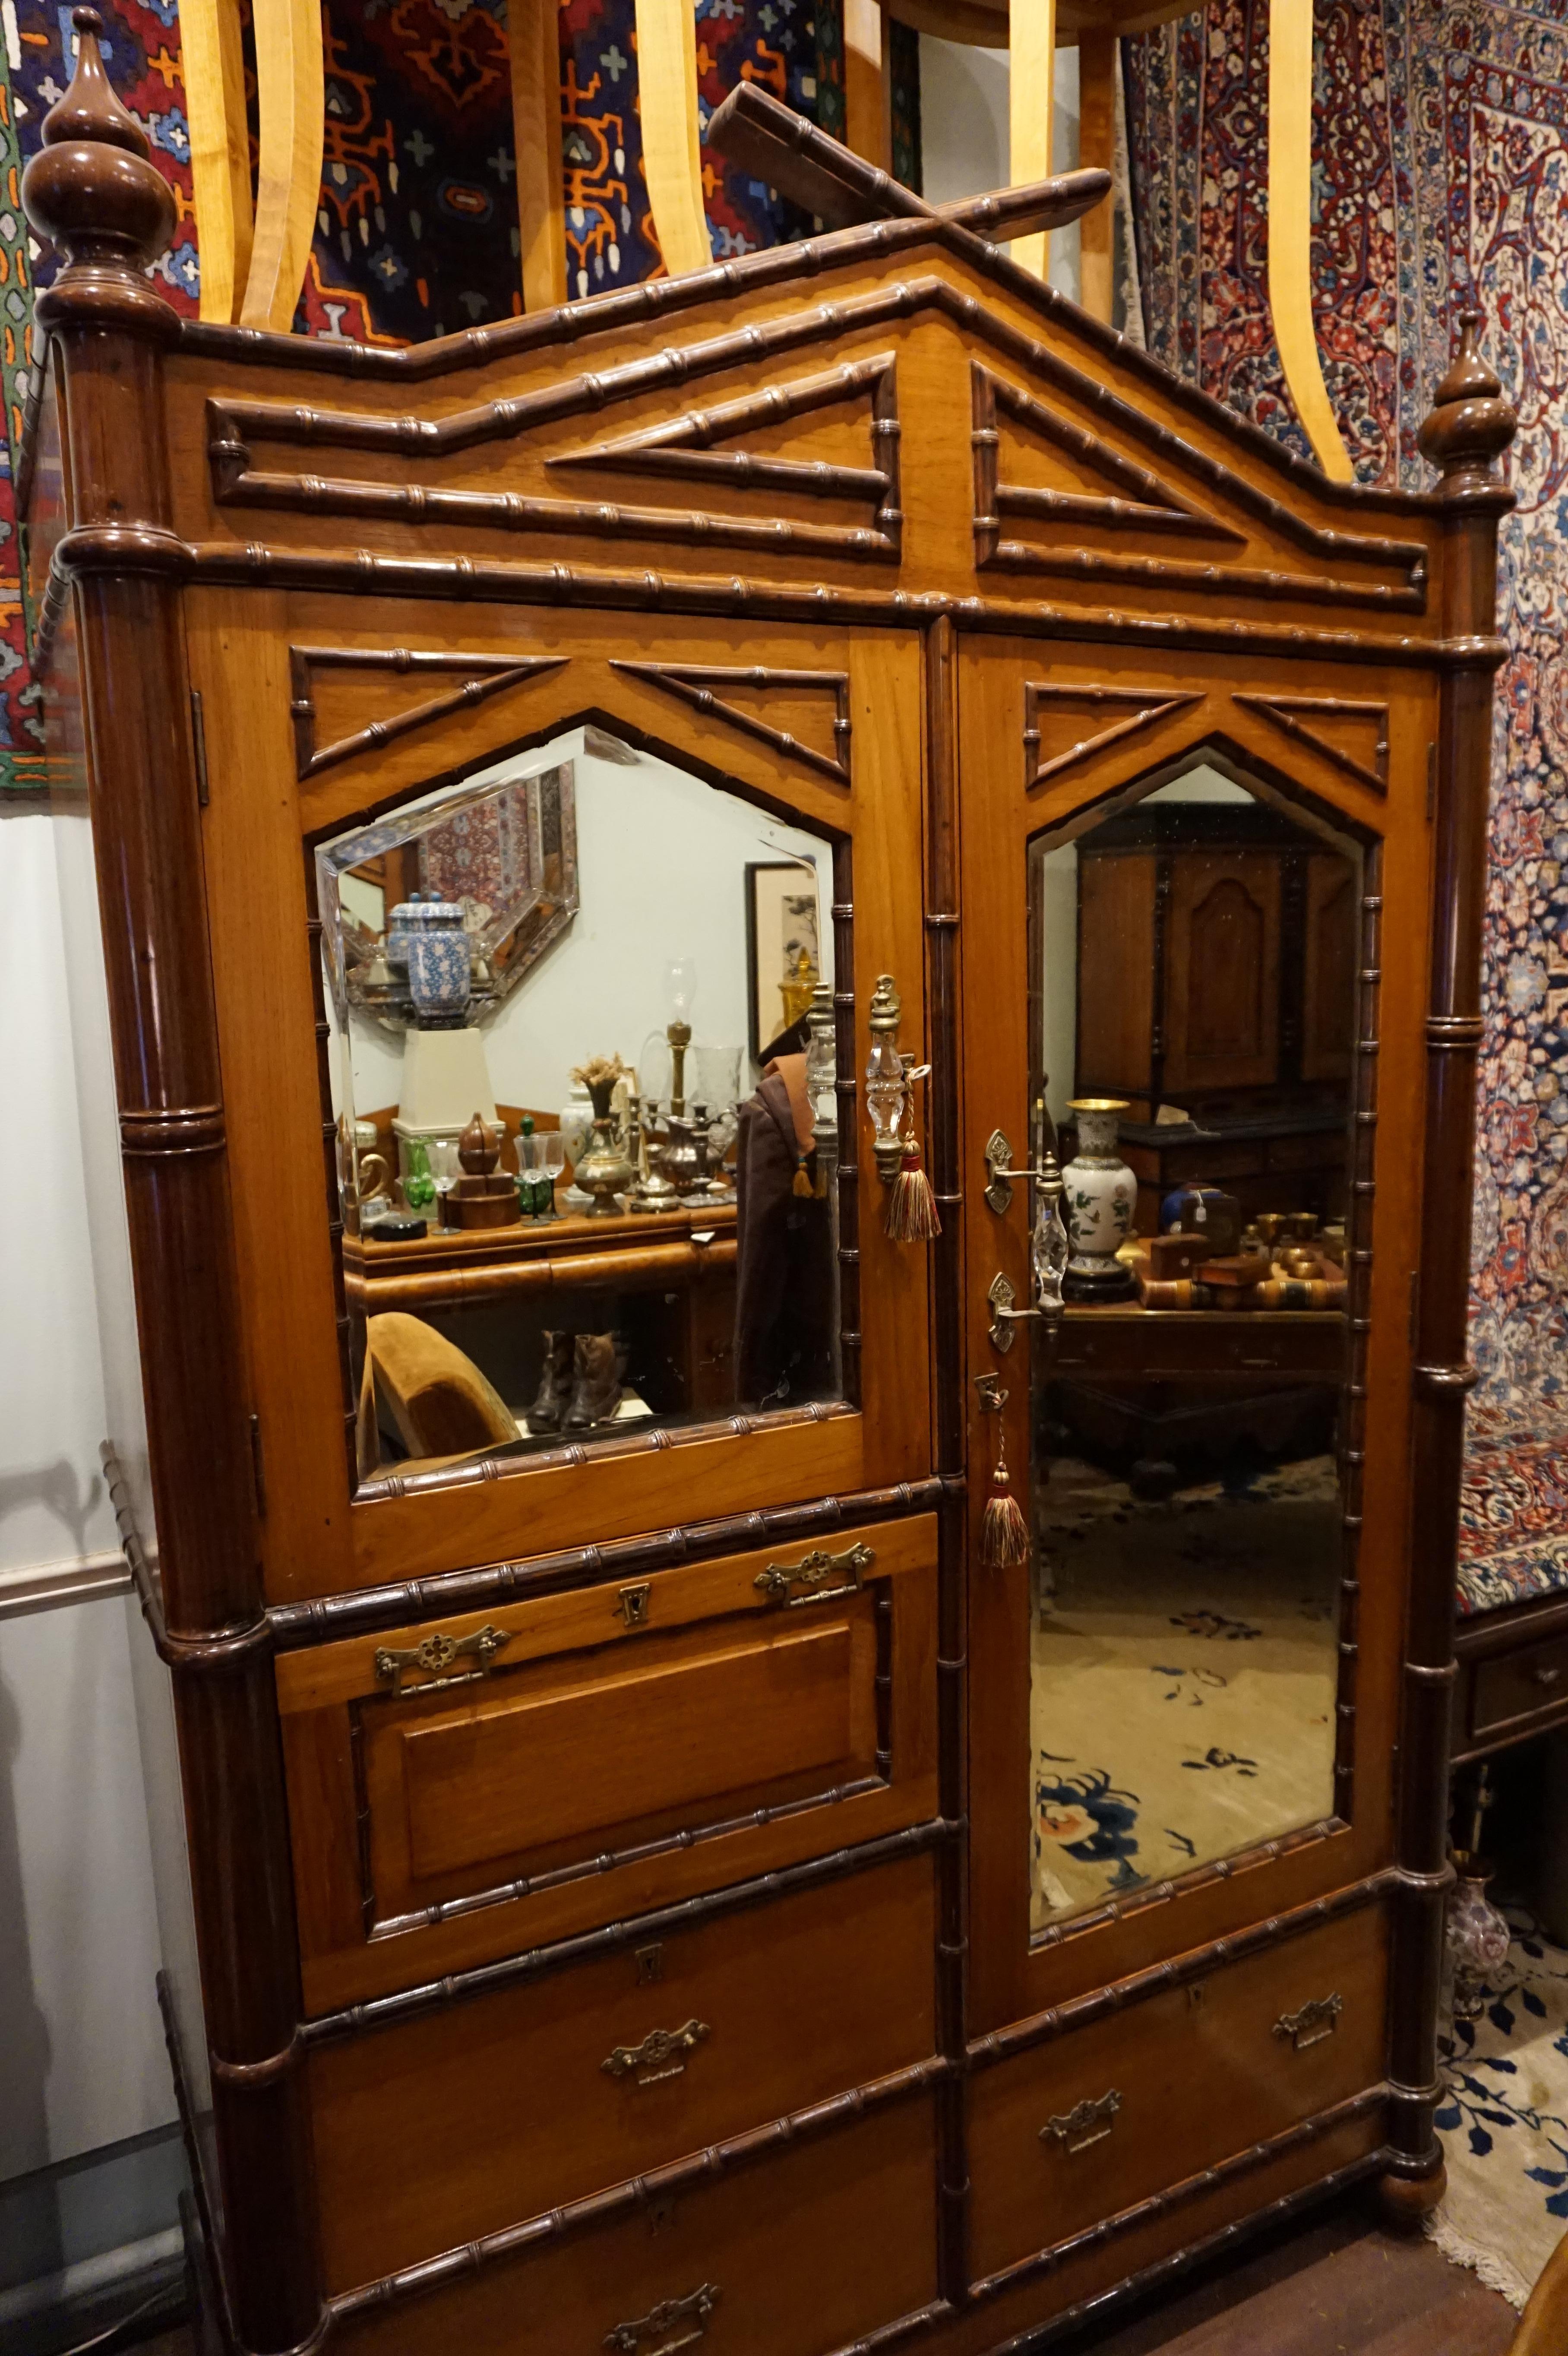 Custom made singular armoire in solid Teak and Rosewood, circa 1880-1890. Attention to detail and old world craftsmanship best describe this piece. Inspired by Orientalist themes this cupboard features a gable moulding, finials, Rosewood wraparound